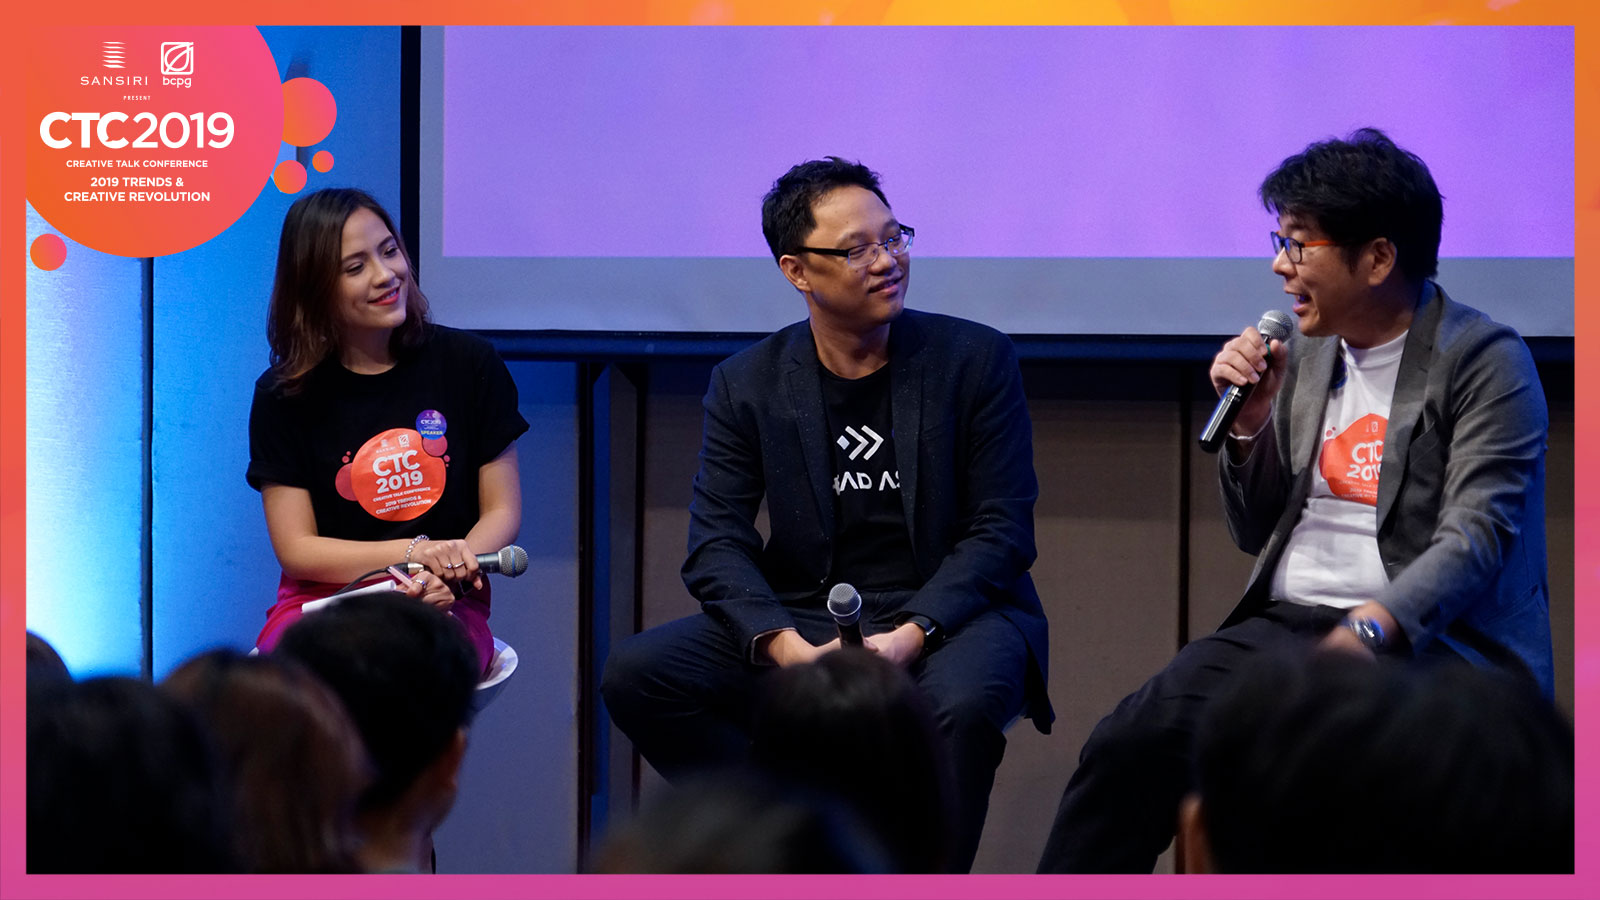 CTC2019: Next Generation Entrepreneur: How to Be The Disruptor Instead of Being Disrupted